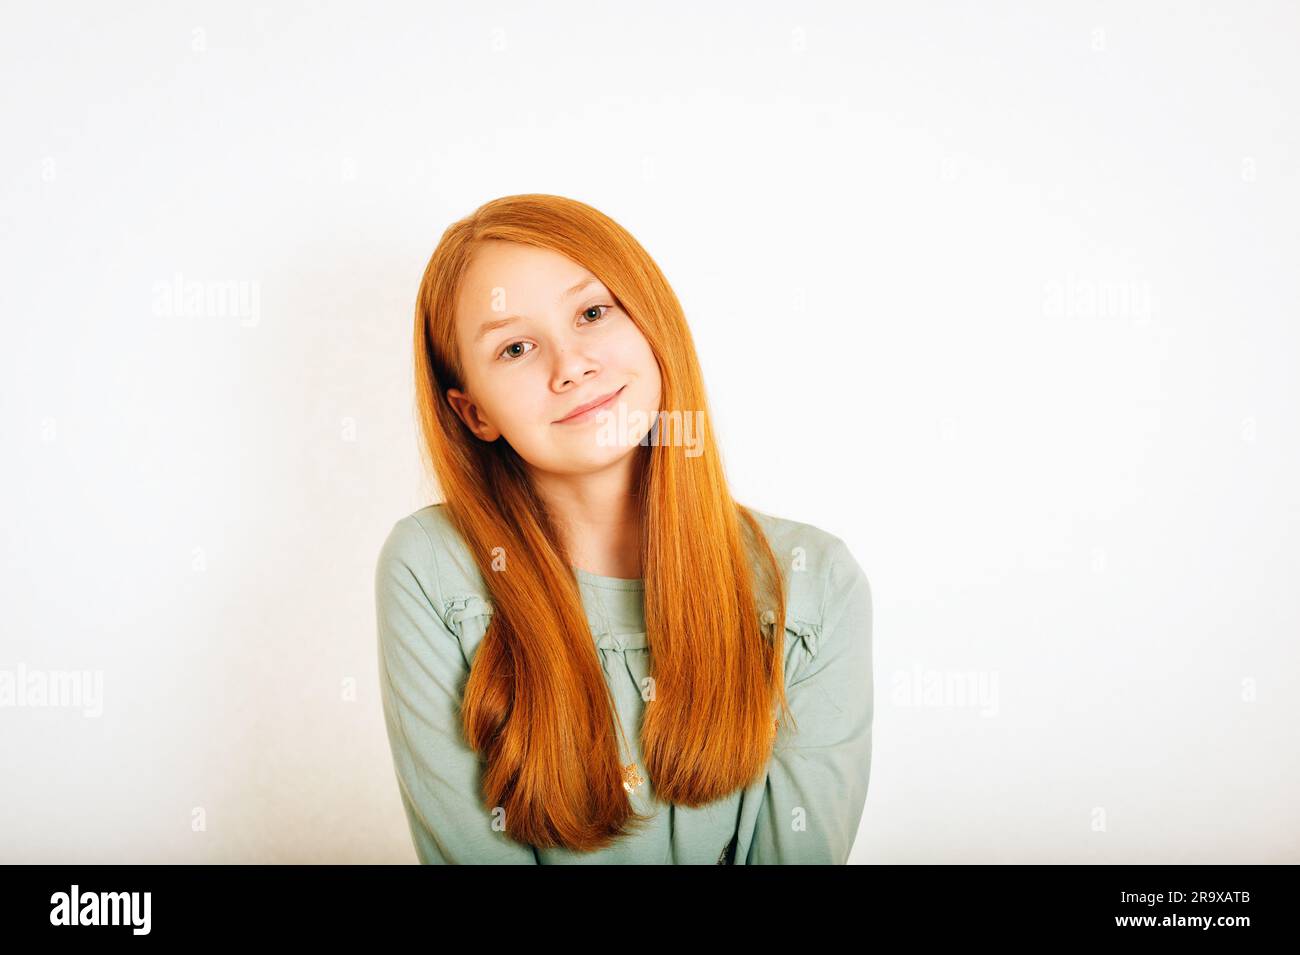 Studio shot of young preteen red-haired girl against white background Stock Photo